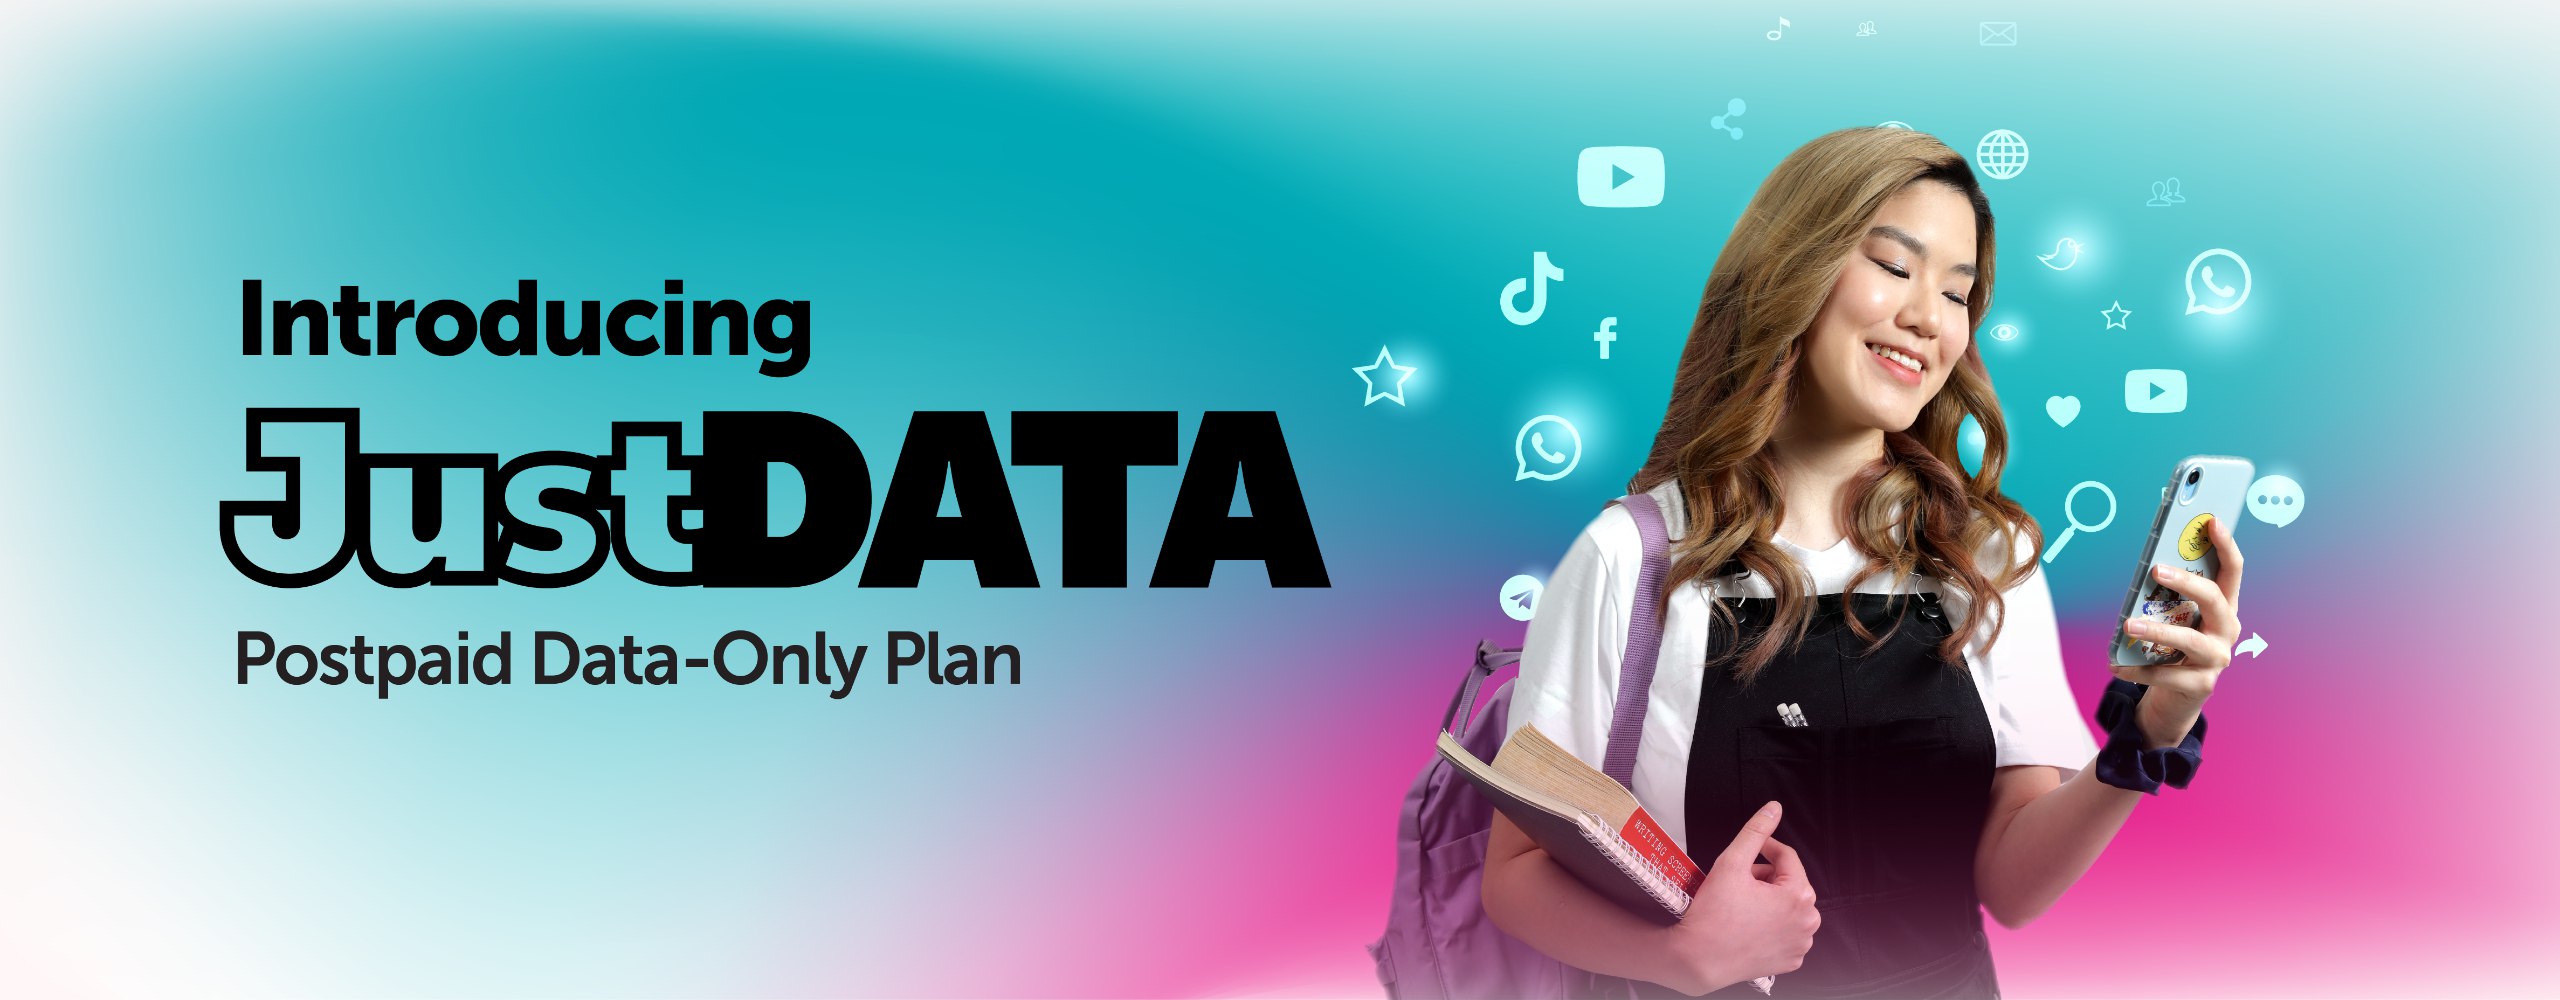 Get internet access with Just Data